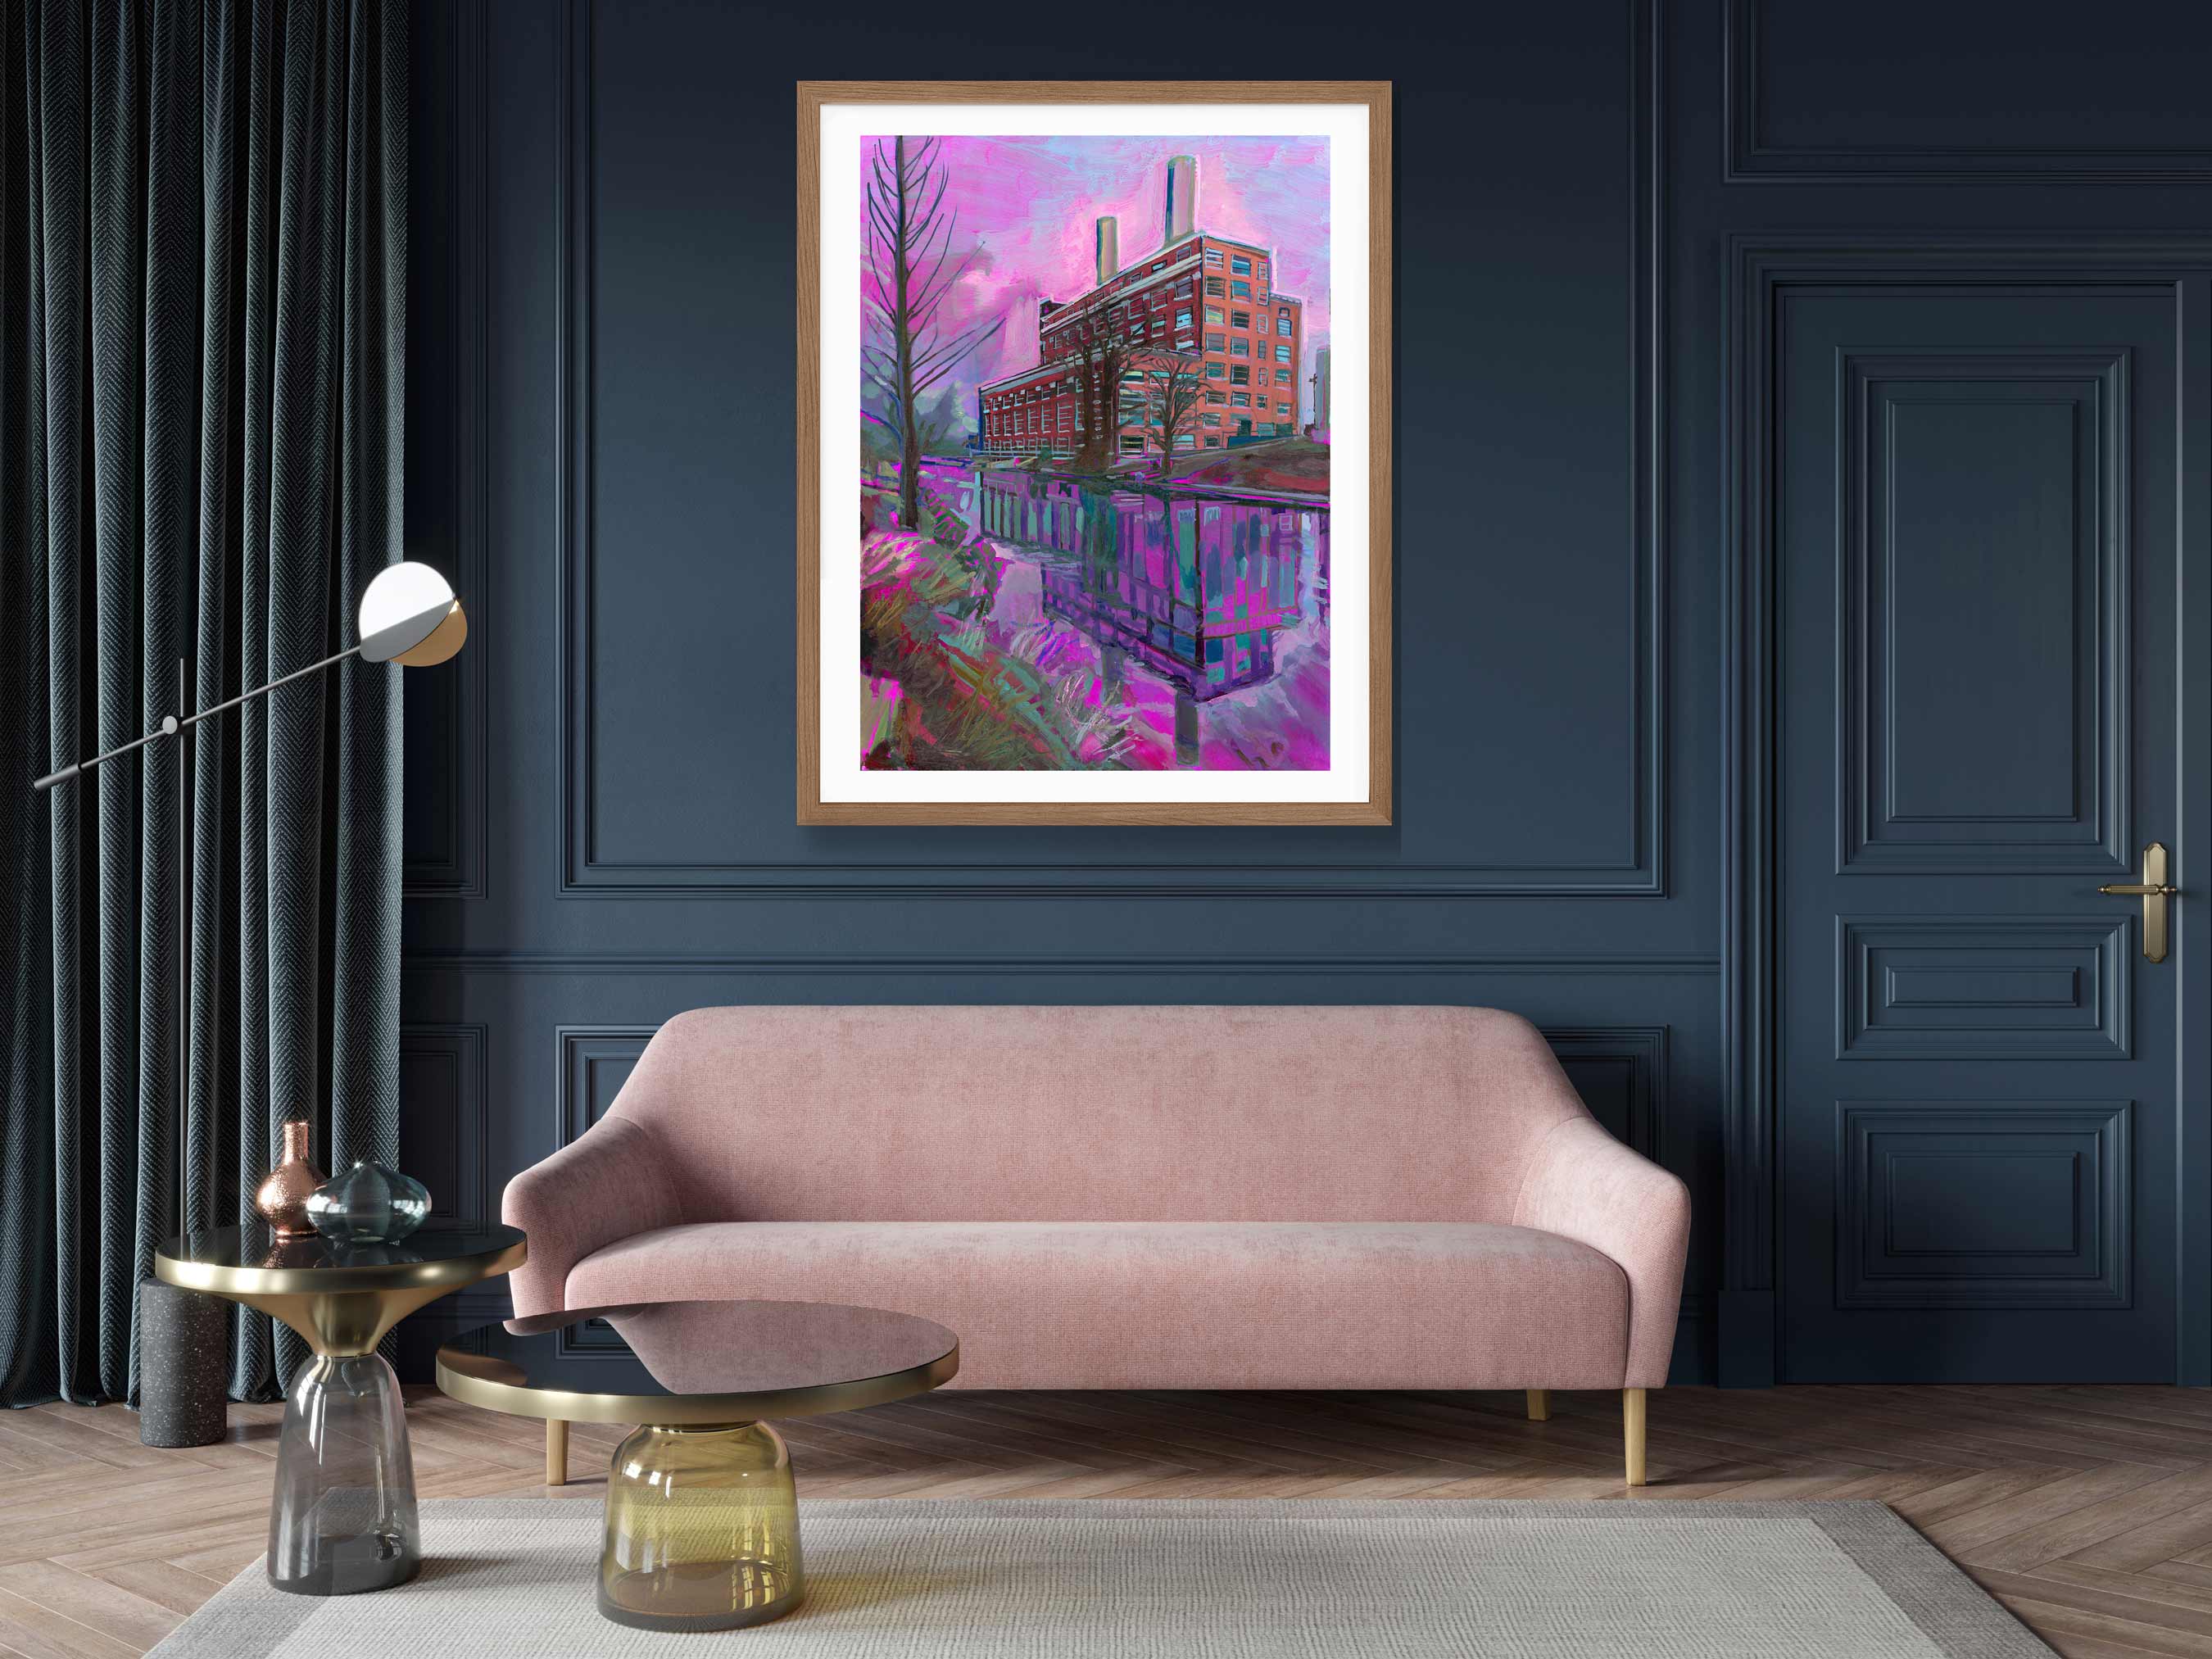 The Landmark & Comal River Art Print | Archival print of my original painting | Pink Sky Industrial Power Plant in New Braunfels, Texas